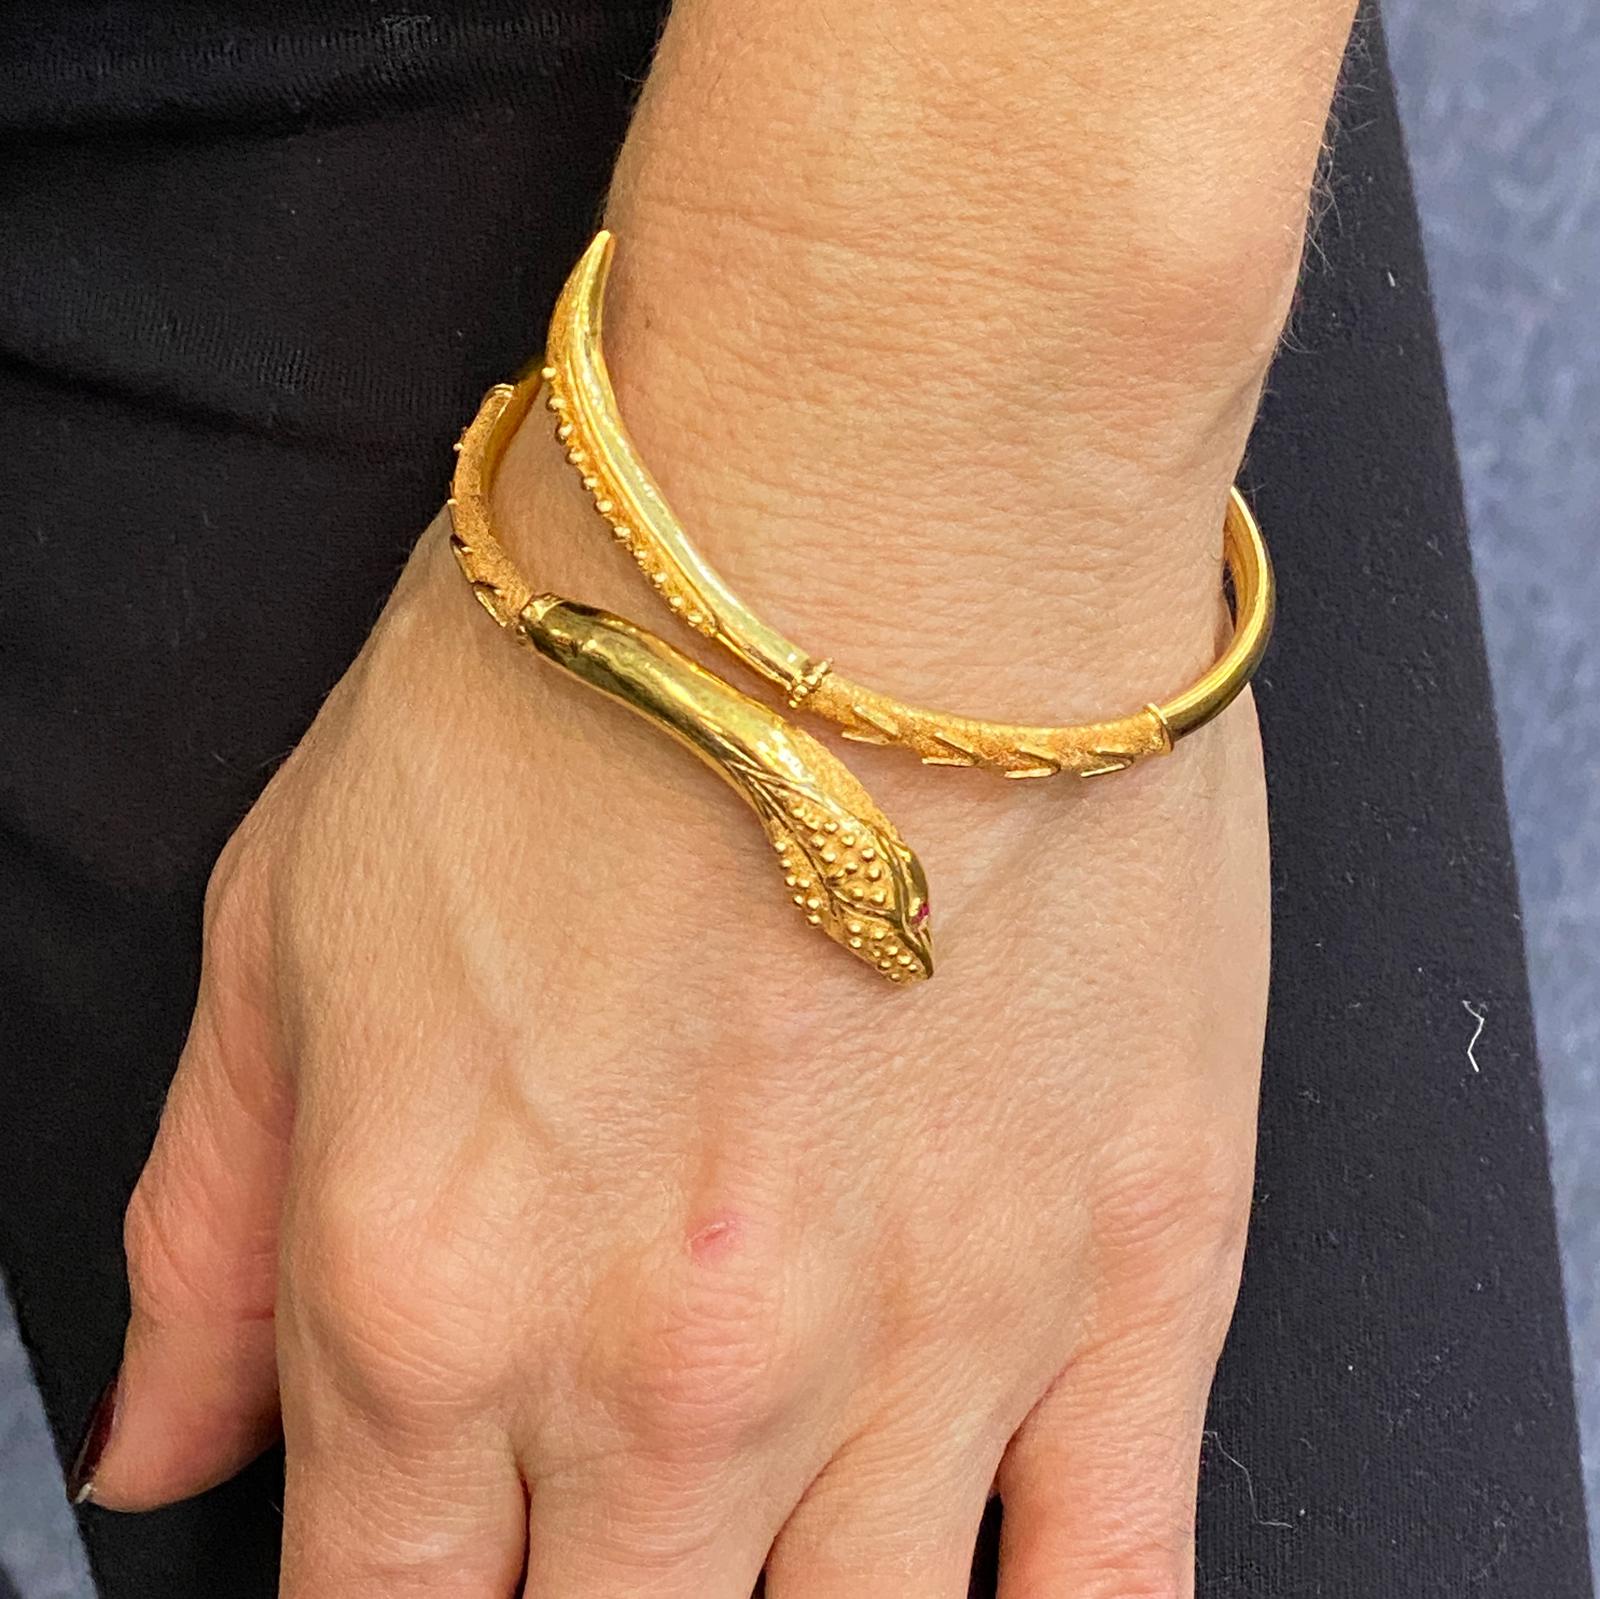 Fabulous cuff snake bracelet fashioned in 21 karat yellow gold with ruby eyes. The bracelet measures approximately 7 inches in internal circumference, and 2.25 inches in diameter. 